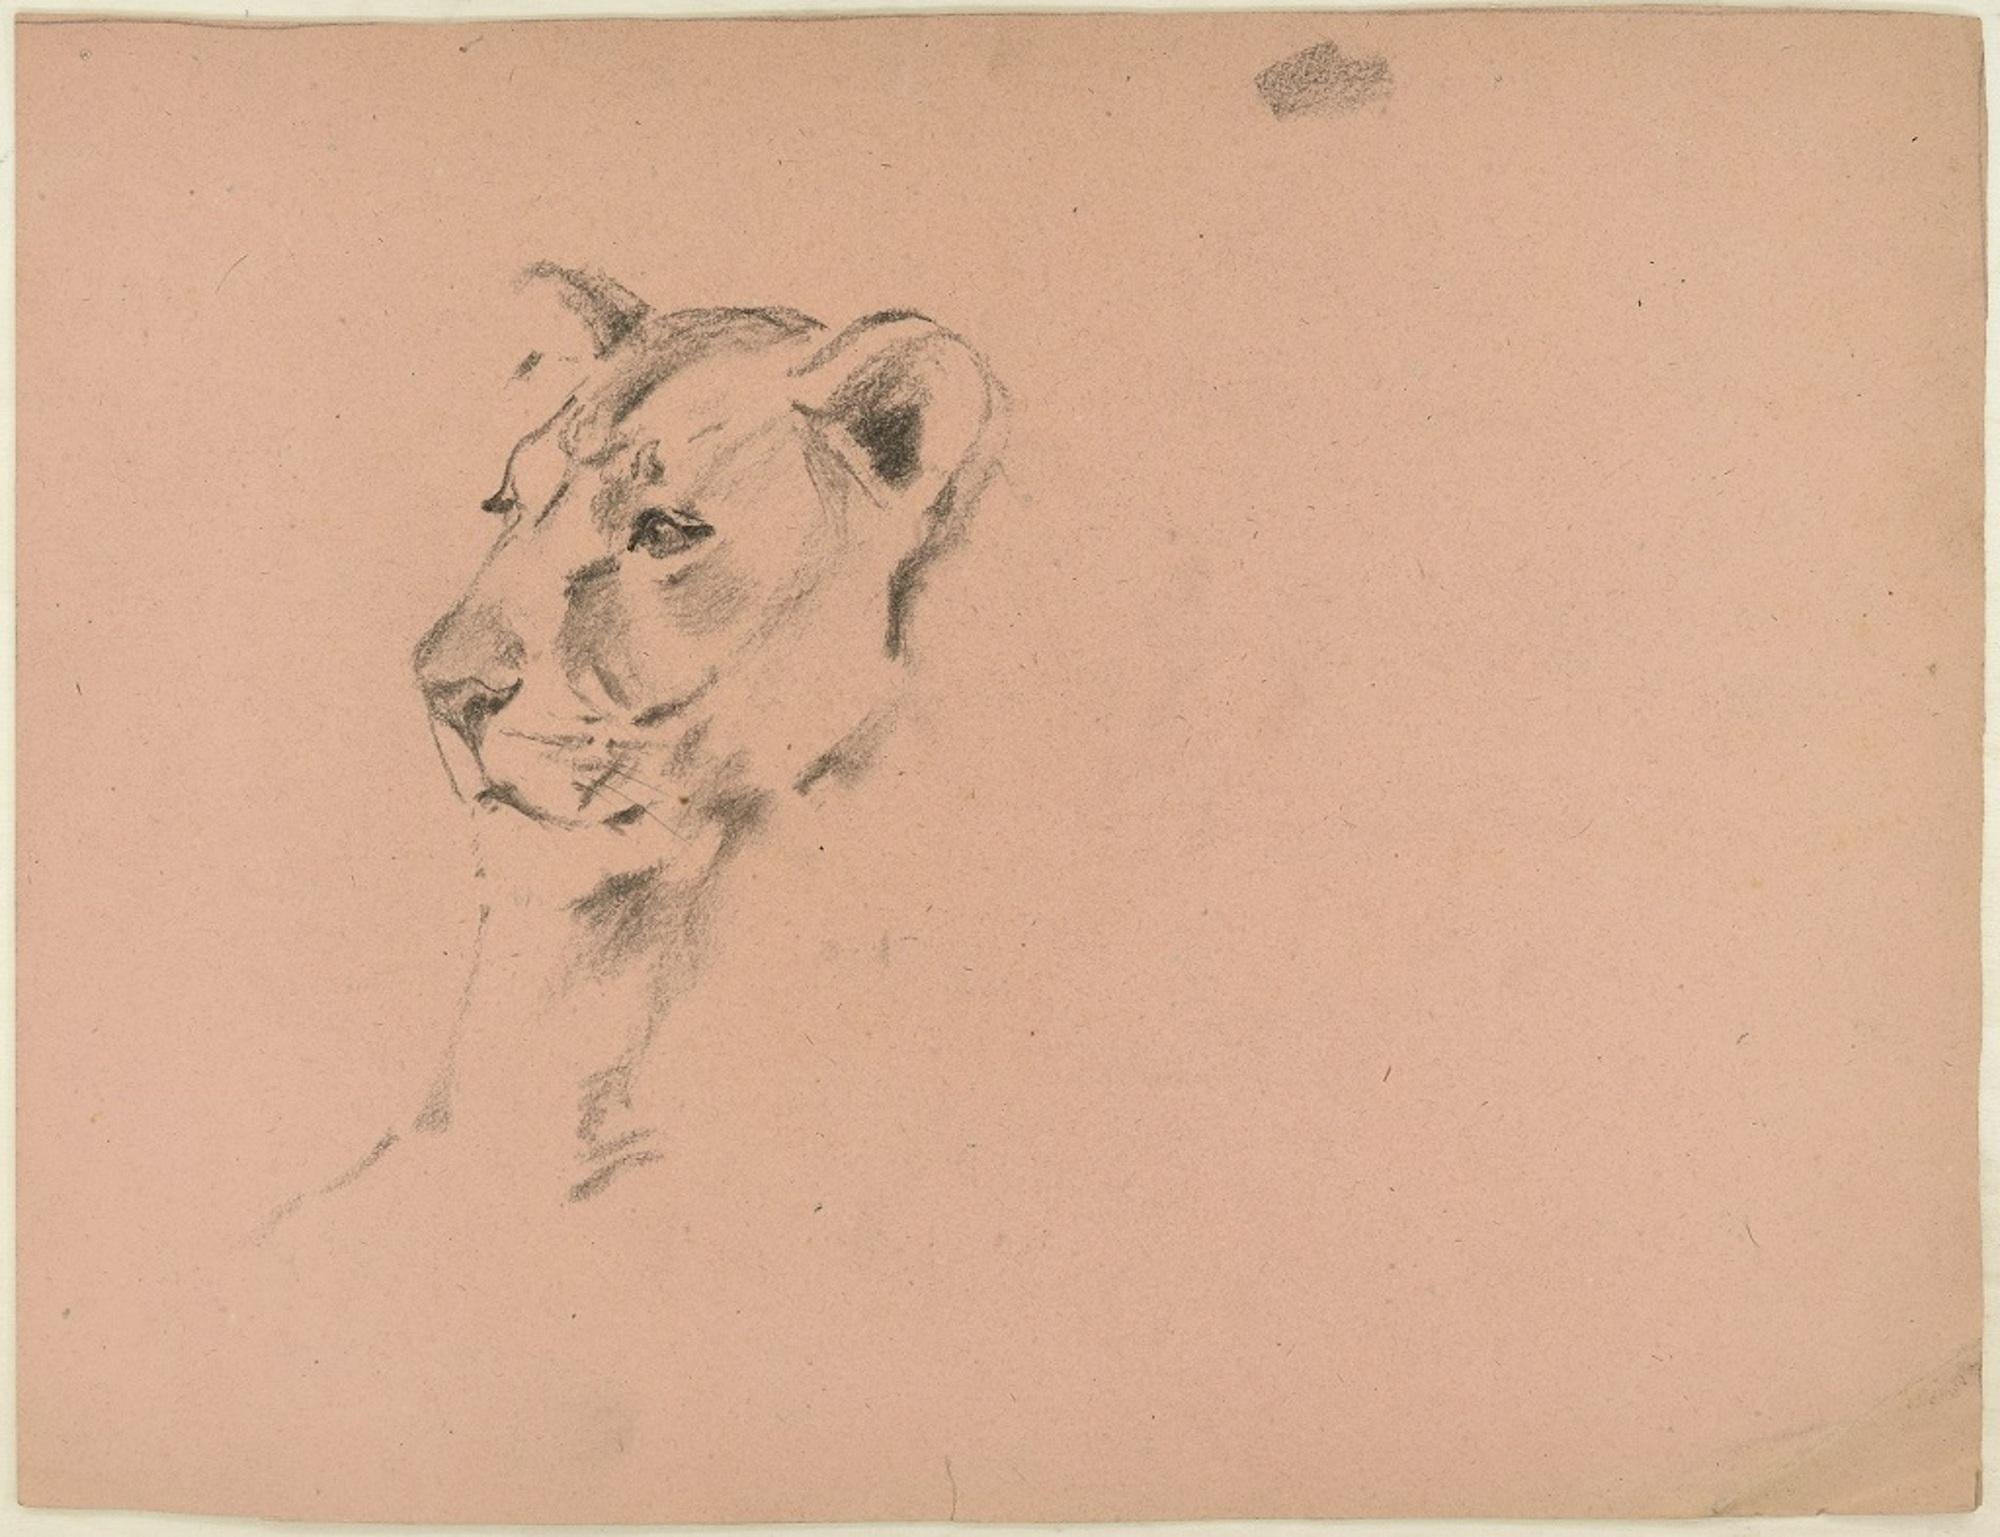 Wilhelm Lorenz Animal Art - Lioness and Hunter - Original Charcoal Drawing by Willy Lorenz - 1970s